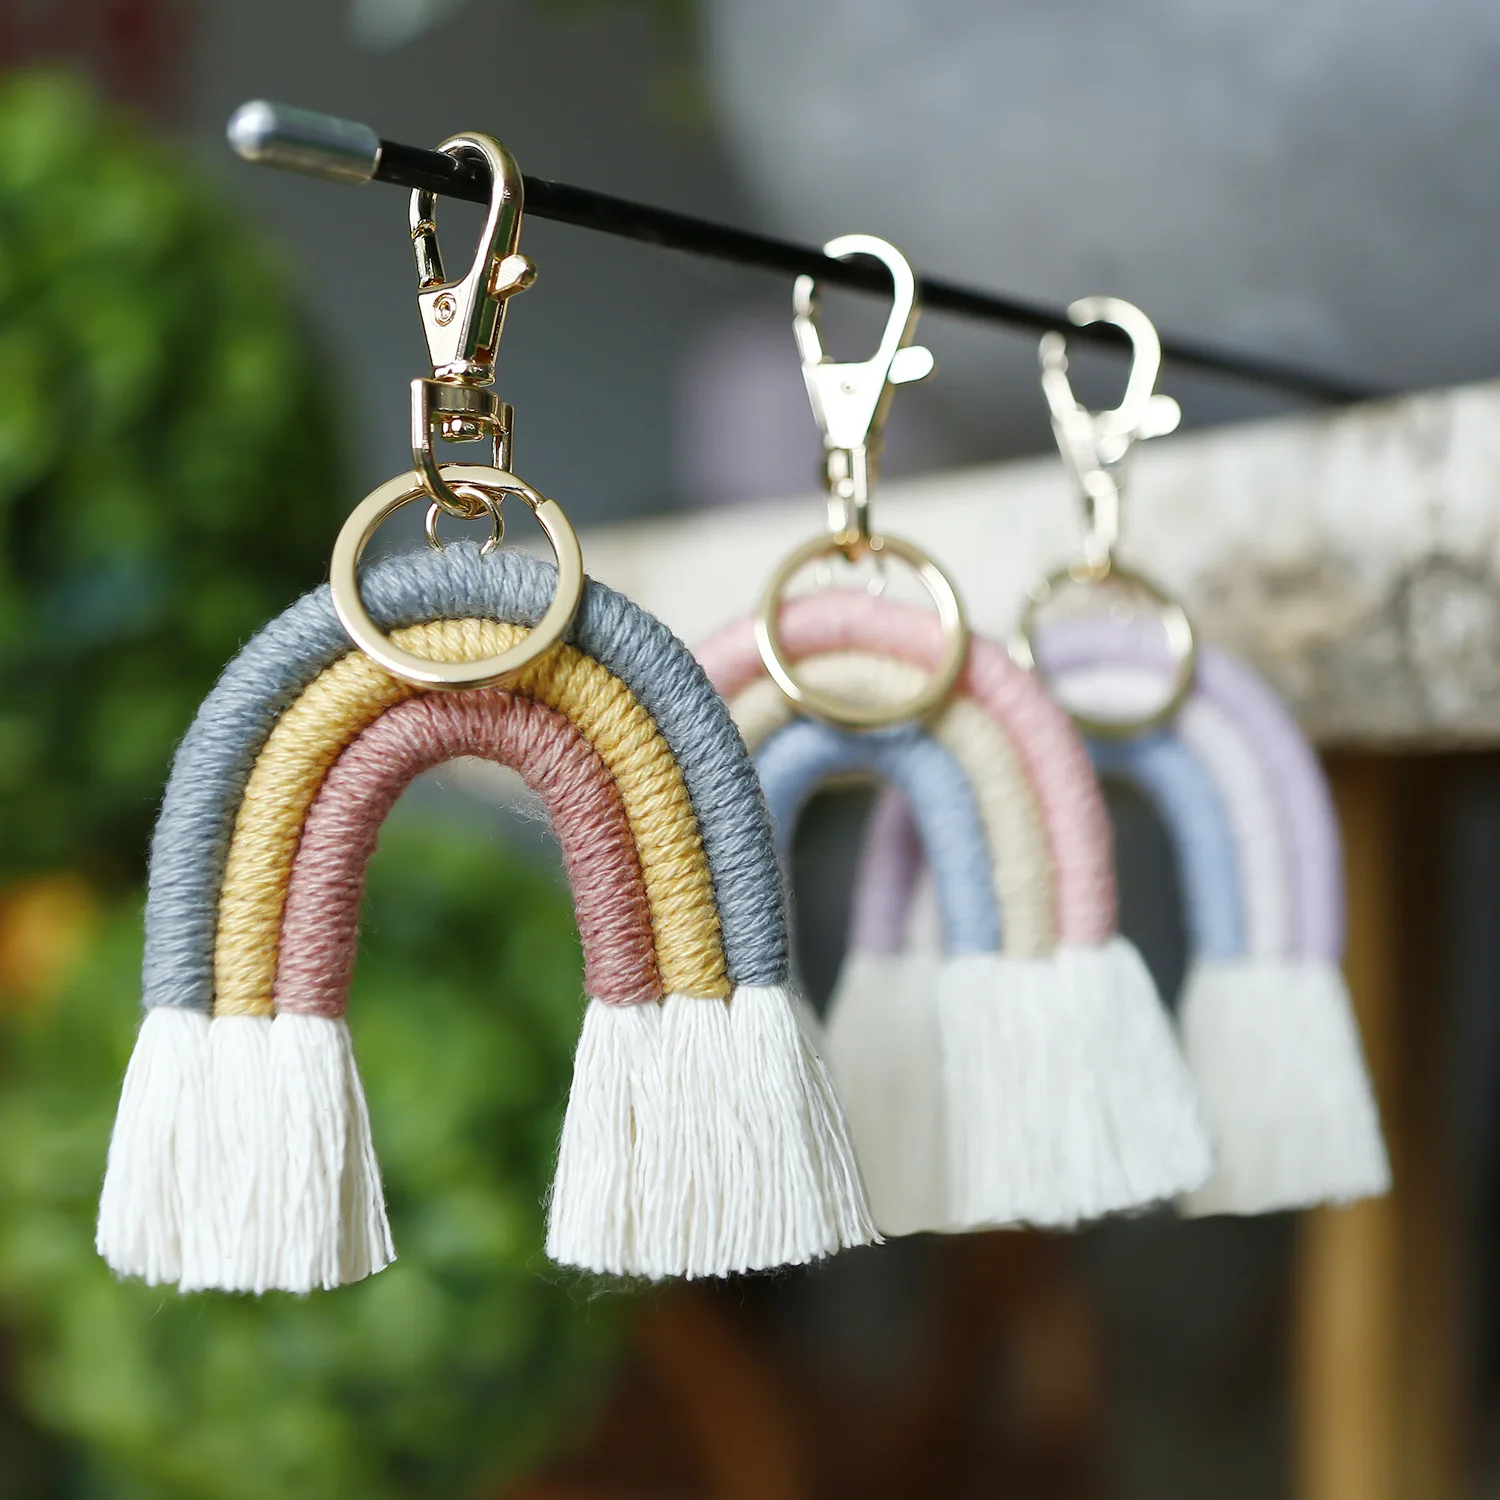 Bohemia Rainbow Tassels Keychains Handmade Weaving Car Hanging Accessorie Key Holder for Women Bags Keyring Home Decoration Gift